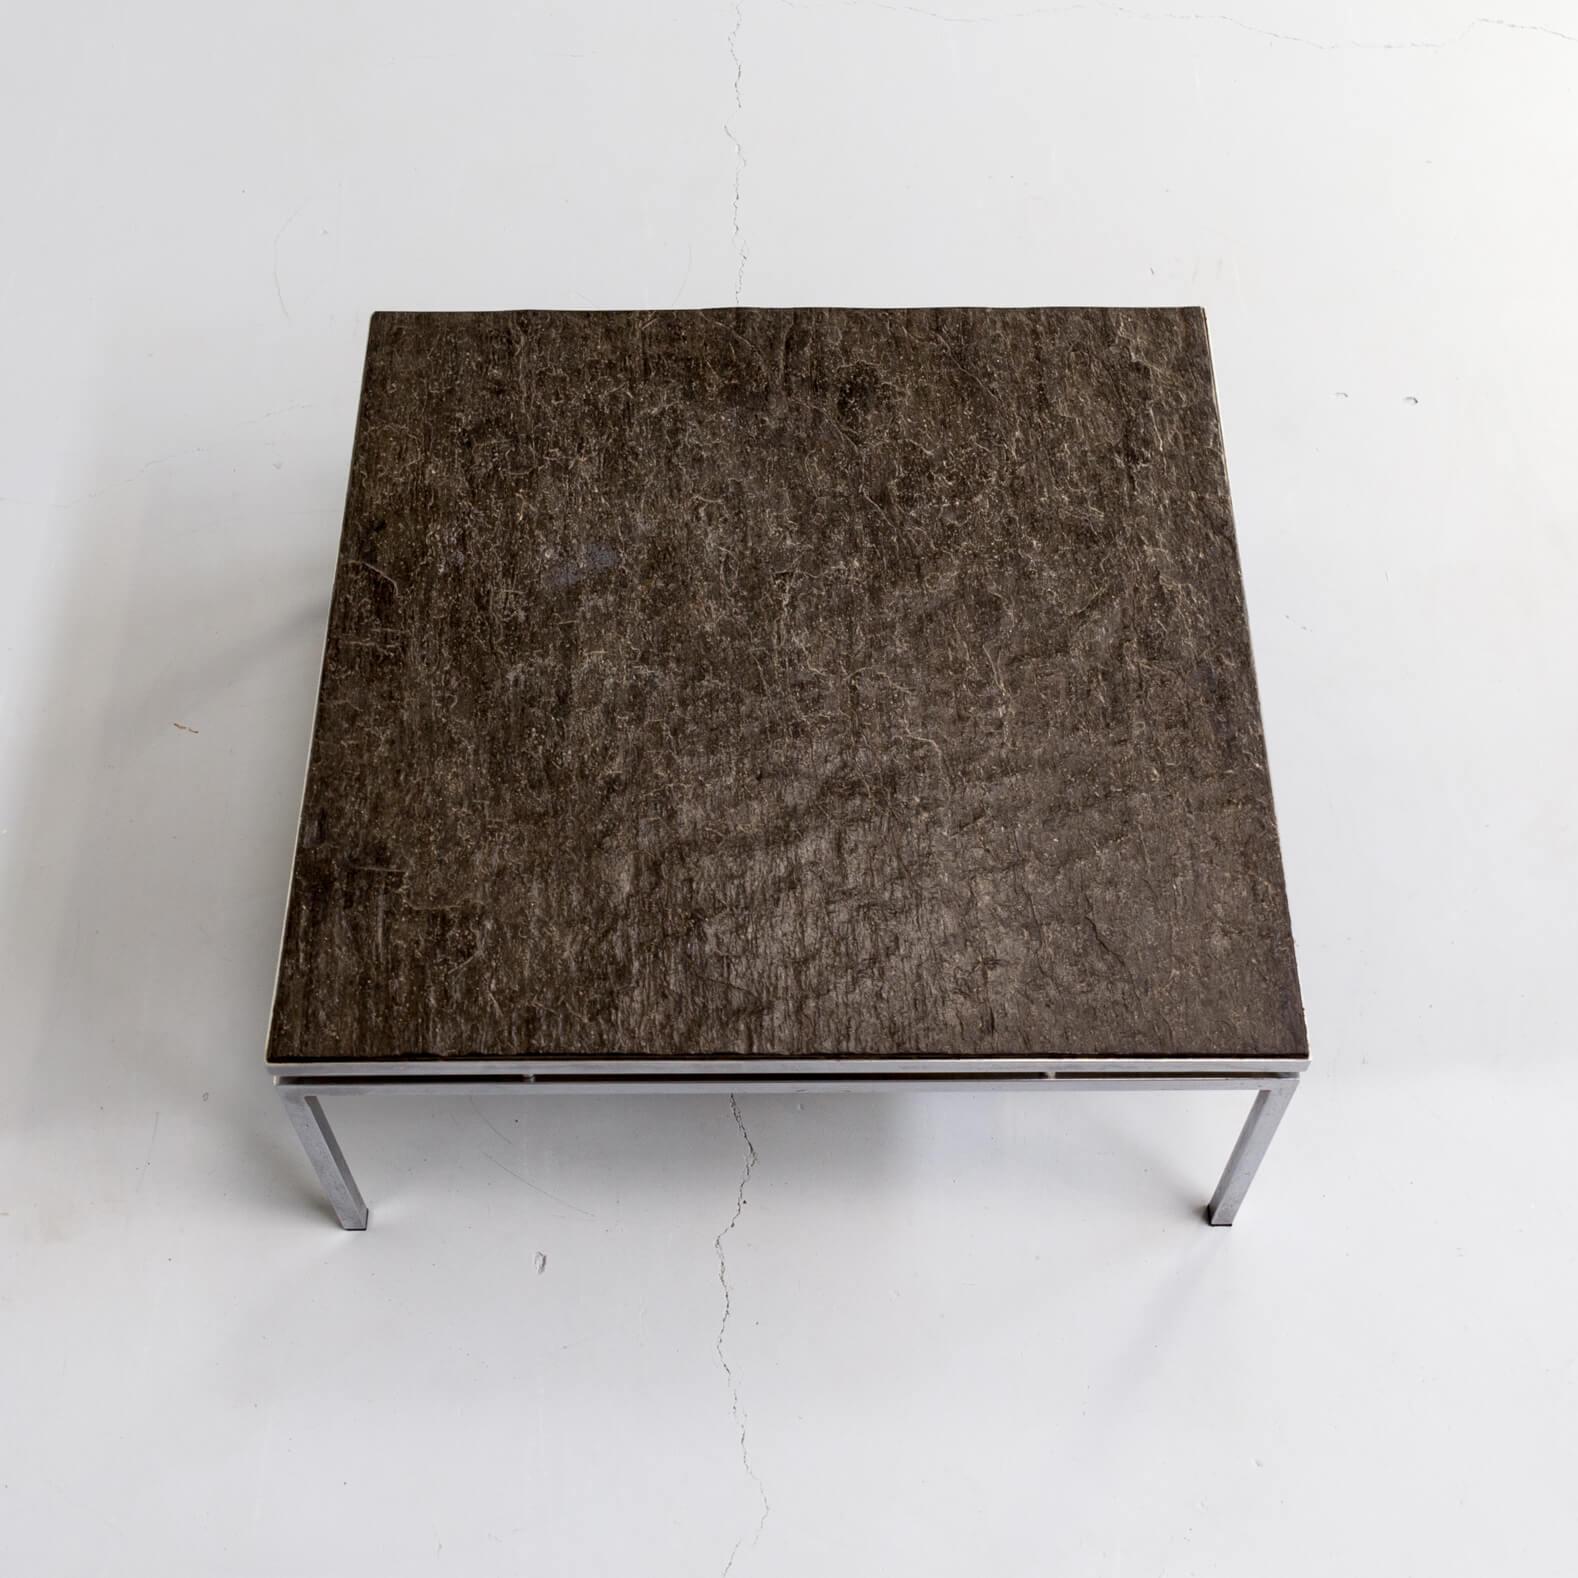 1980s Square Chromed Metal Framed Coffee Table with Slate Worktop For Sale 1